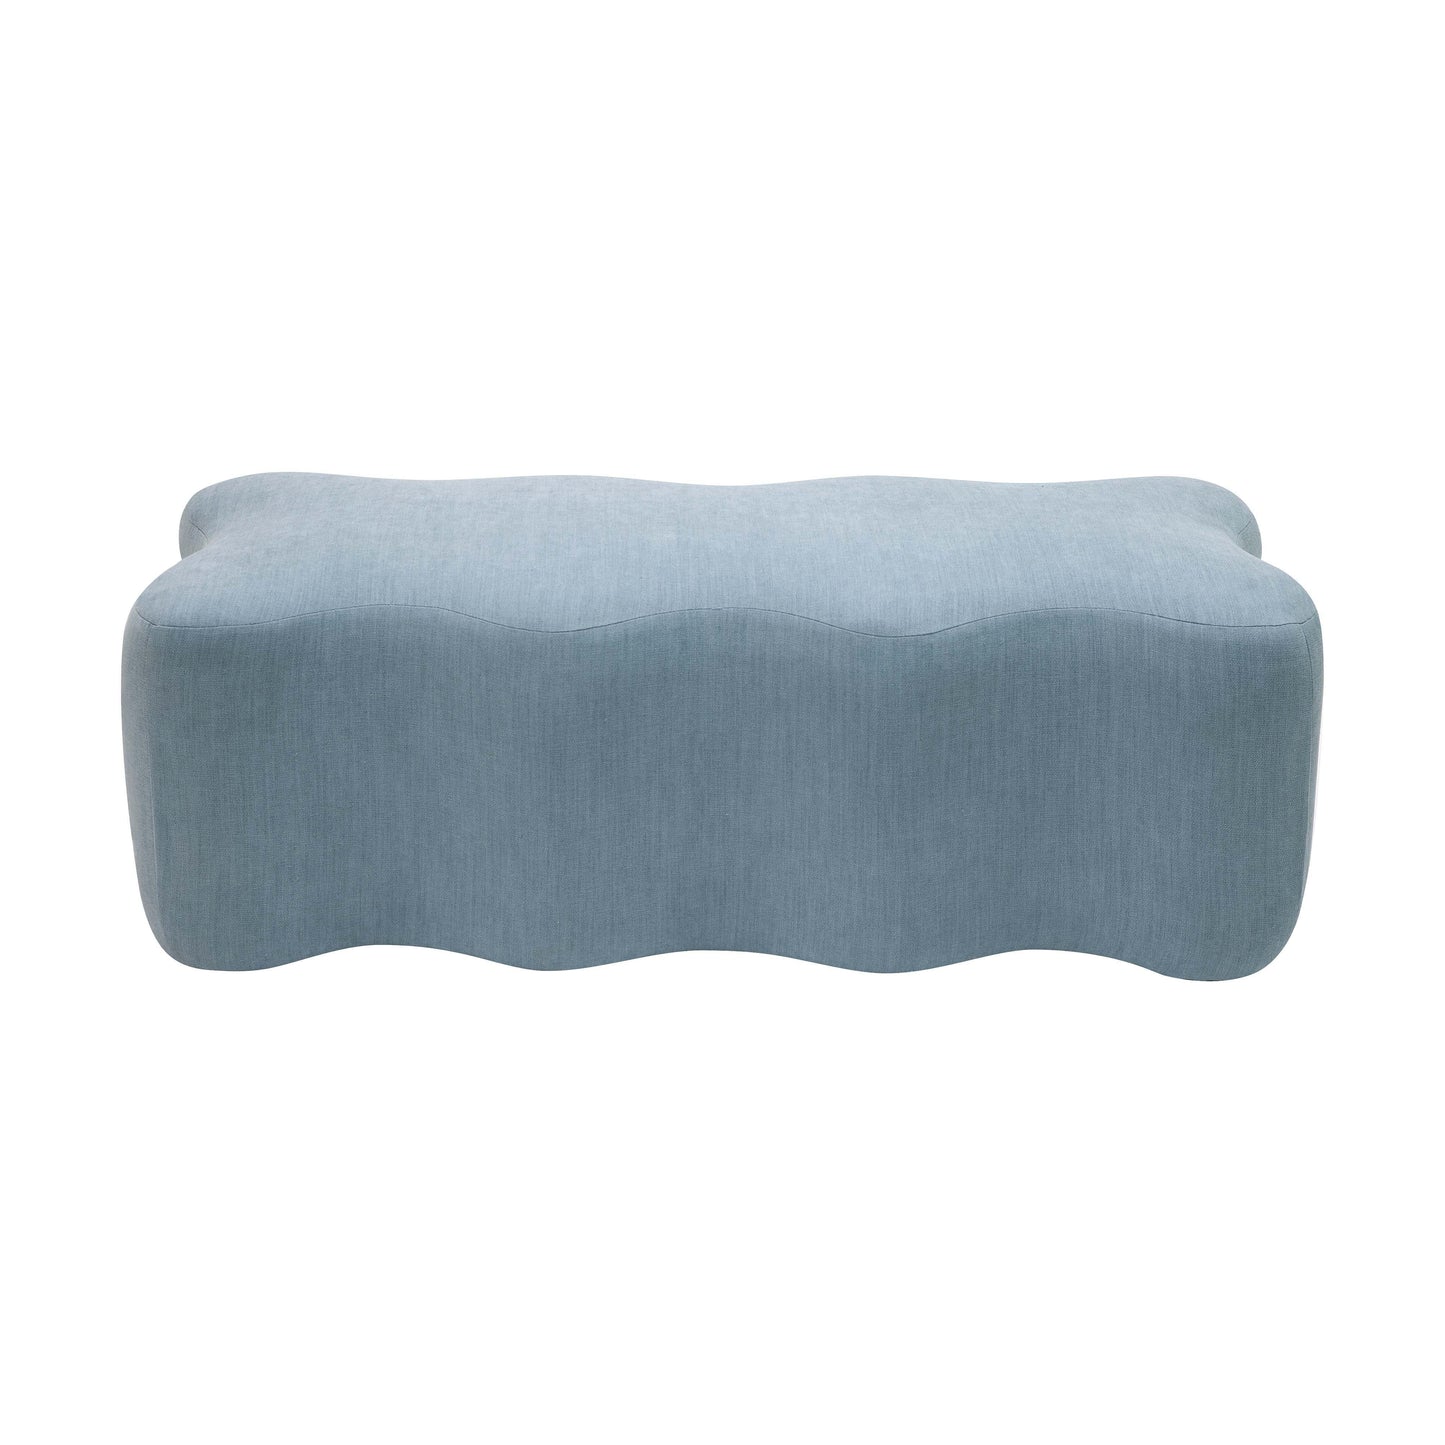 Archie - Upholstered Bench